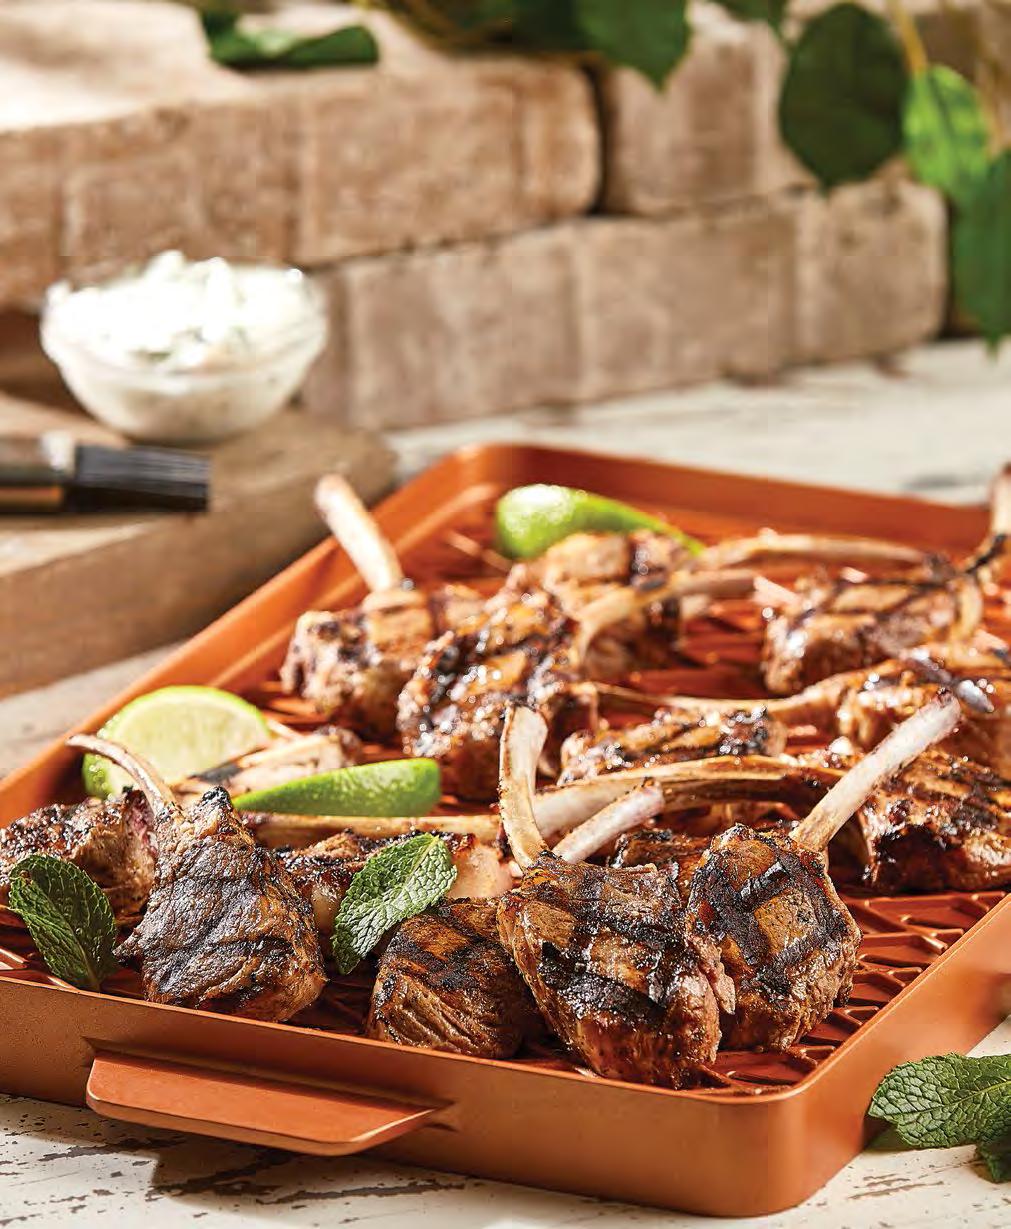 Lamb Chops with Yogurt-Mint Chutney ¼ cup lime juice zest of 1 lime 1 tbsp. olive oil 2 large cloves garlic, sliced thinly ¼ cup mint, chopped 1 tsp. salt ½ tsp.